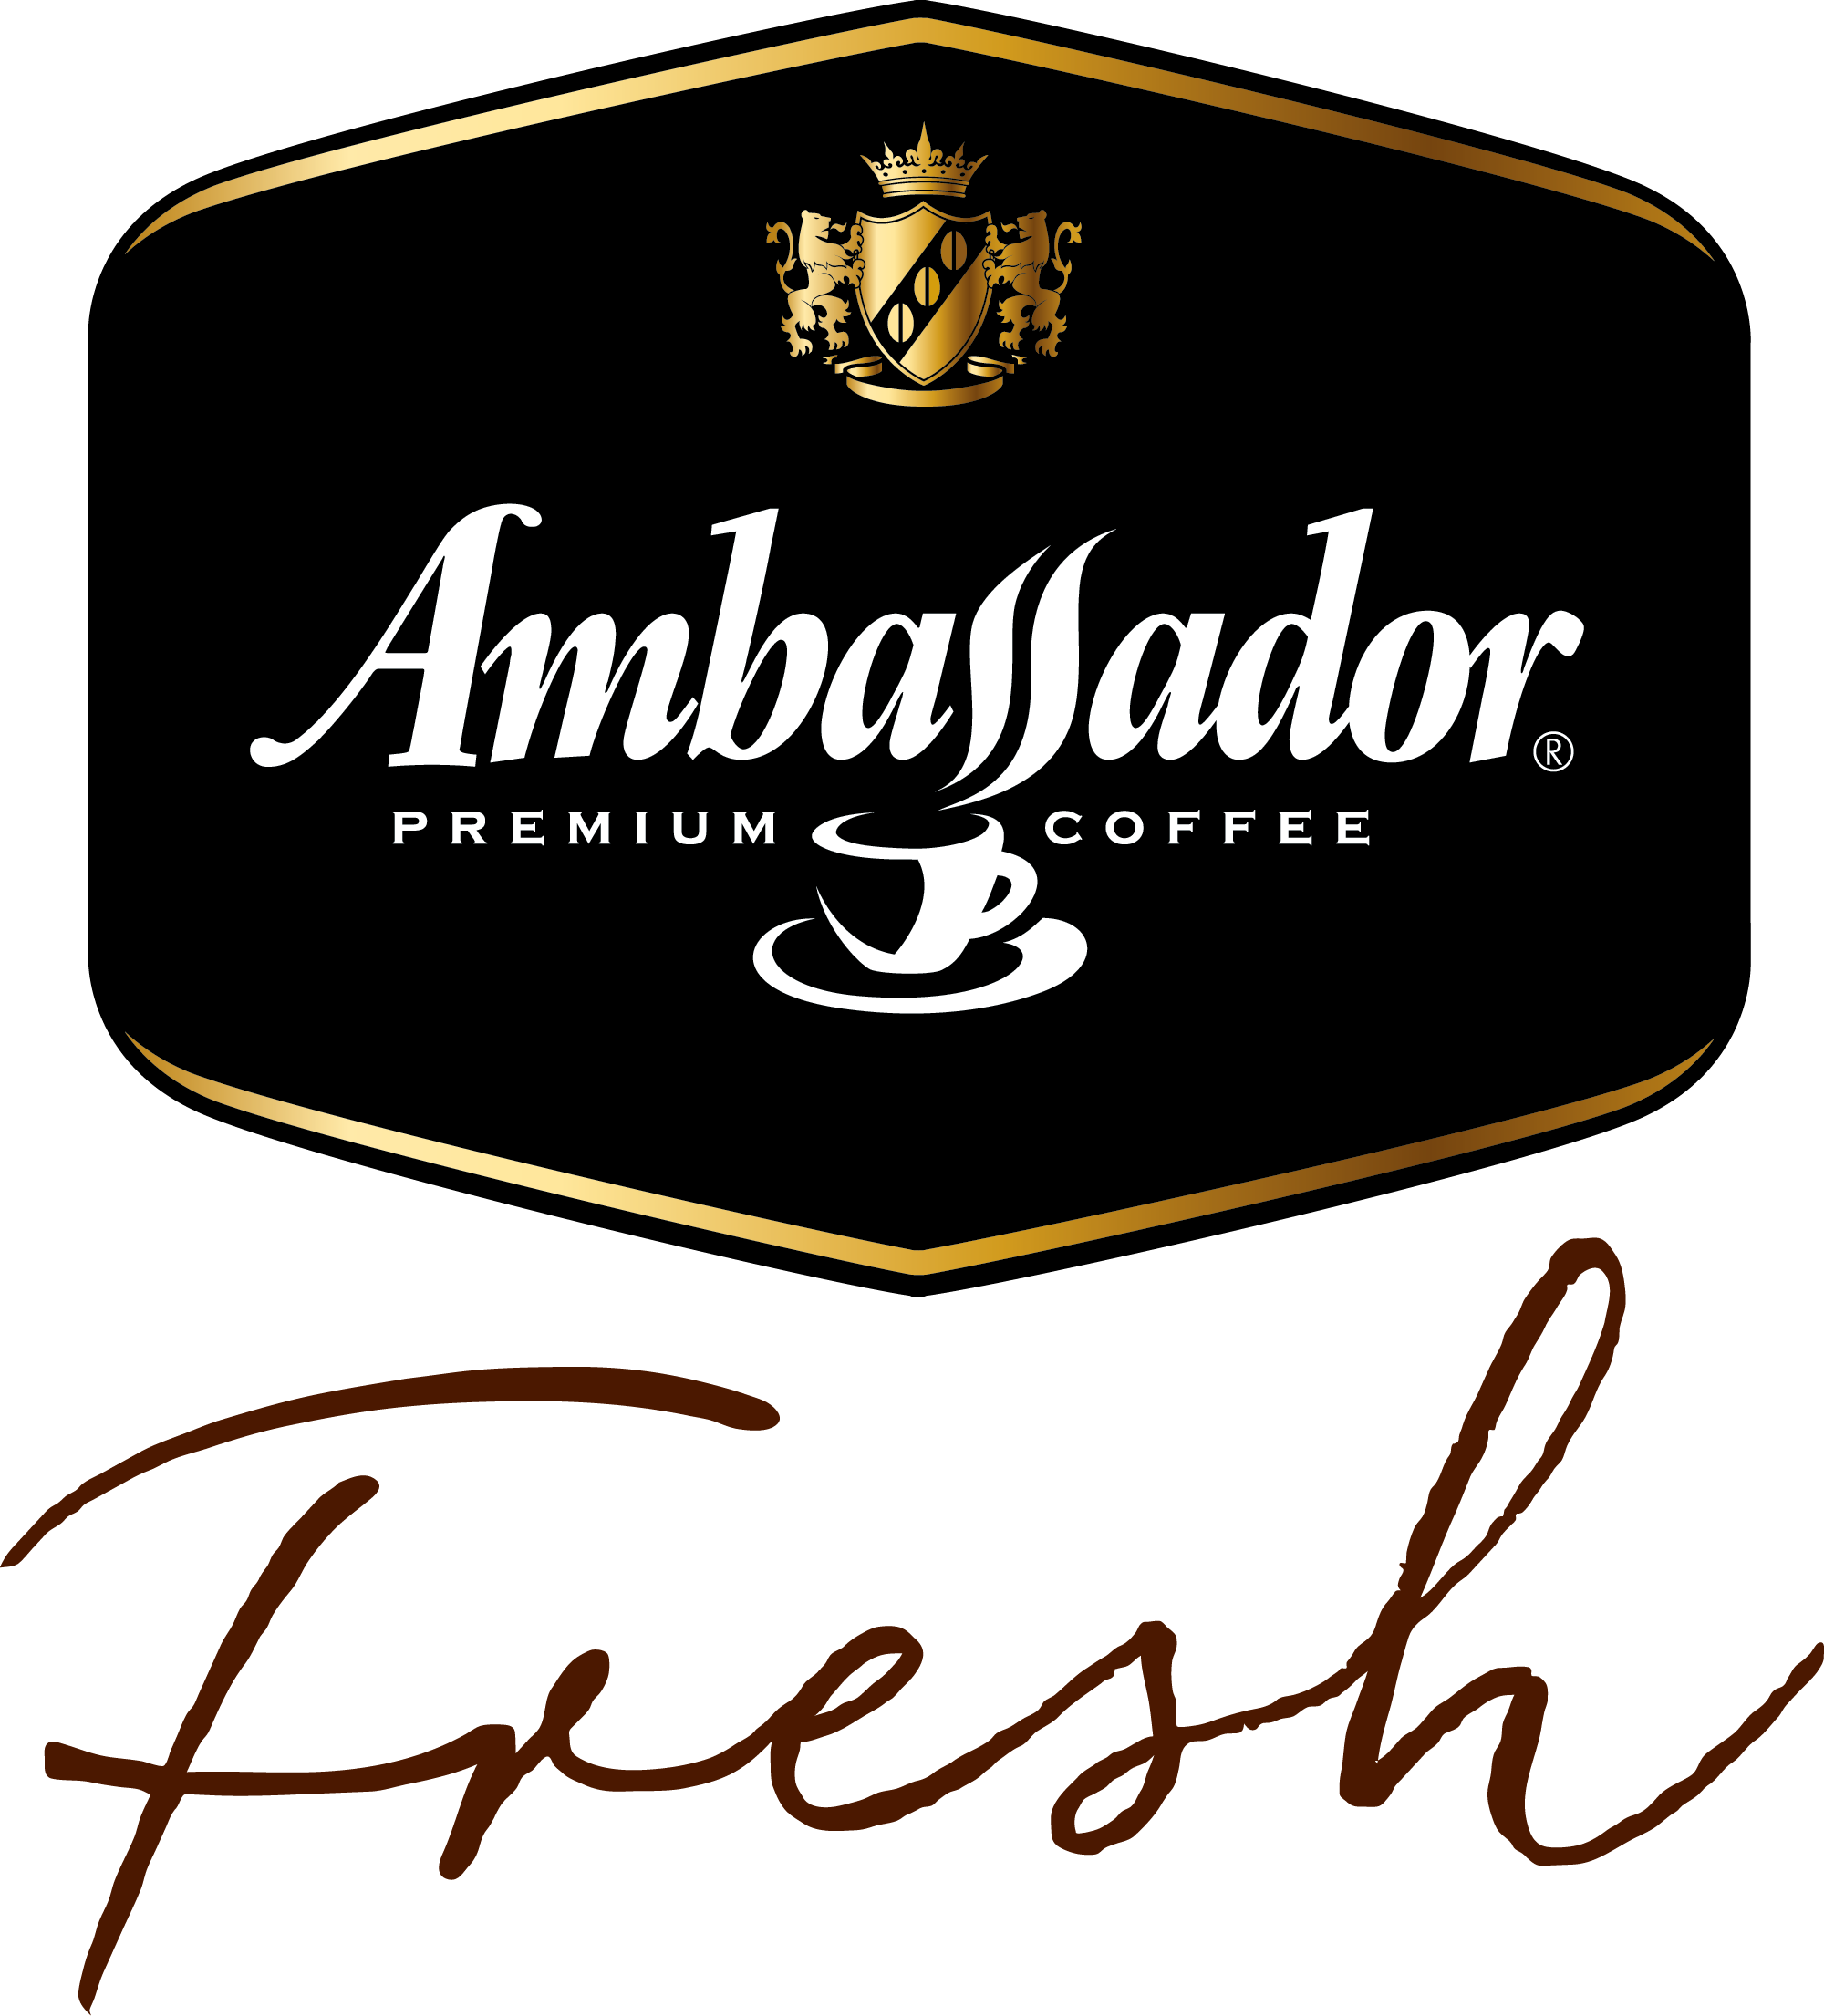 Ambassador Fresh - Fresh roasted coffee directly from the manufactory!